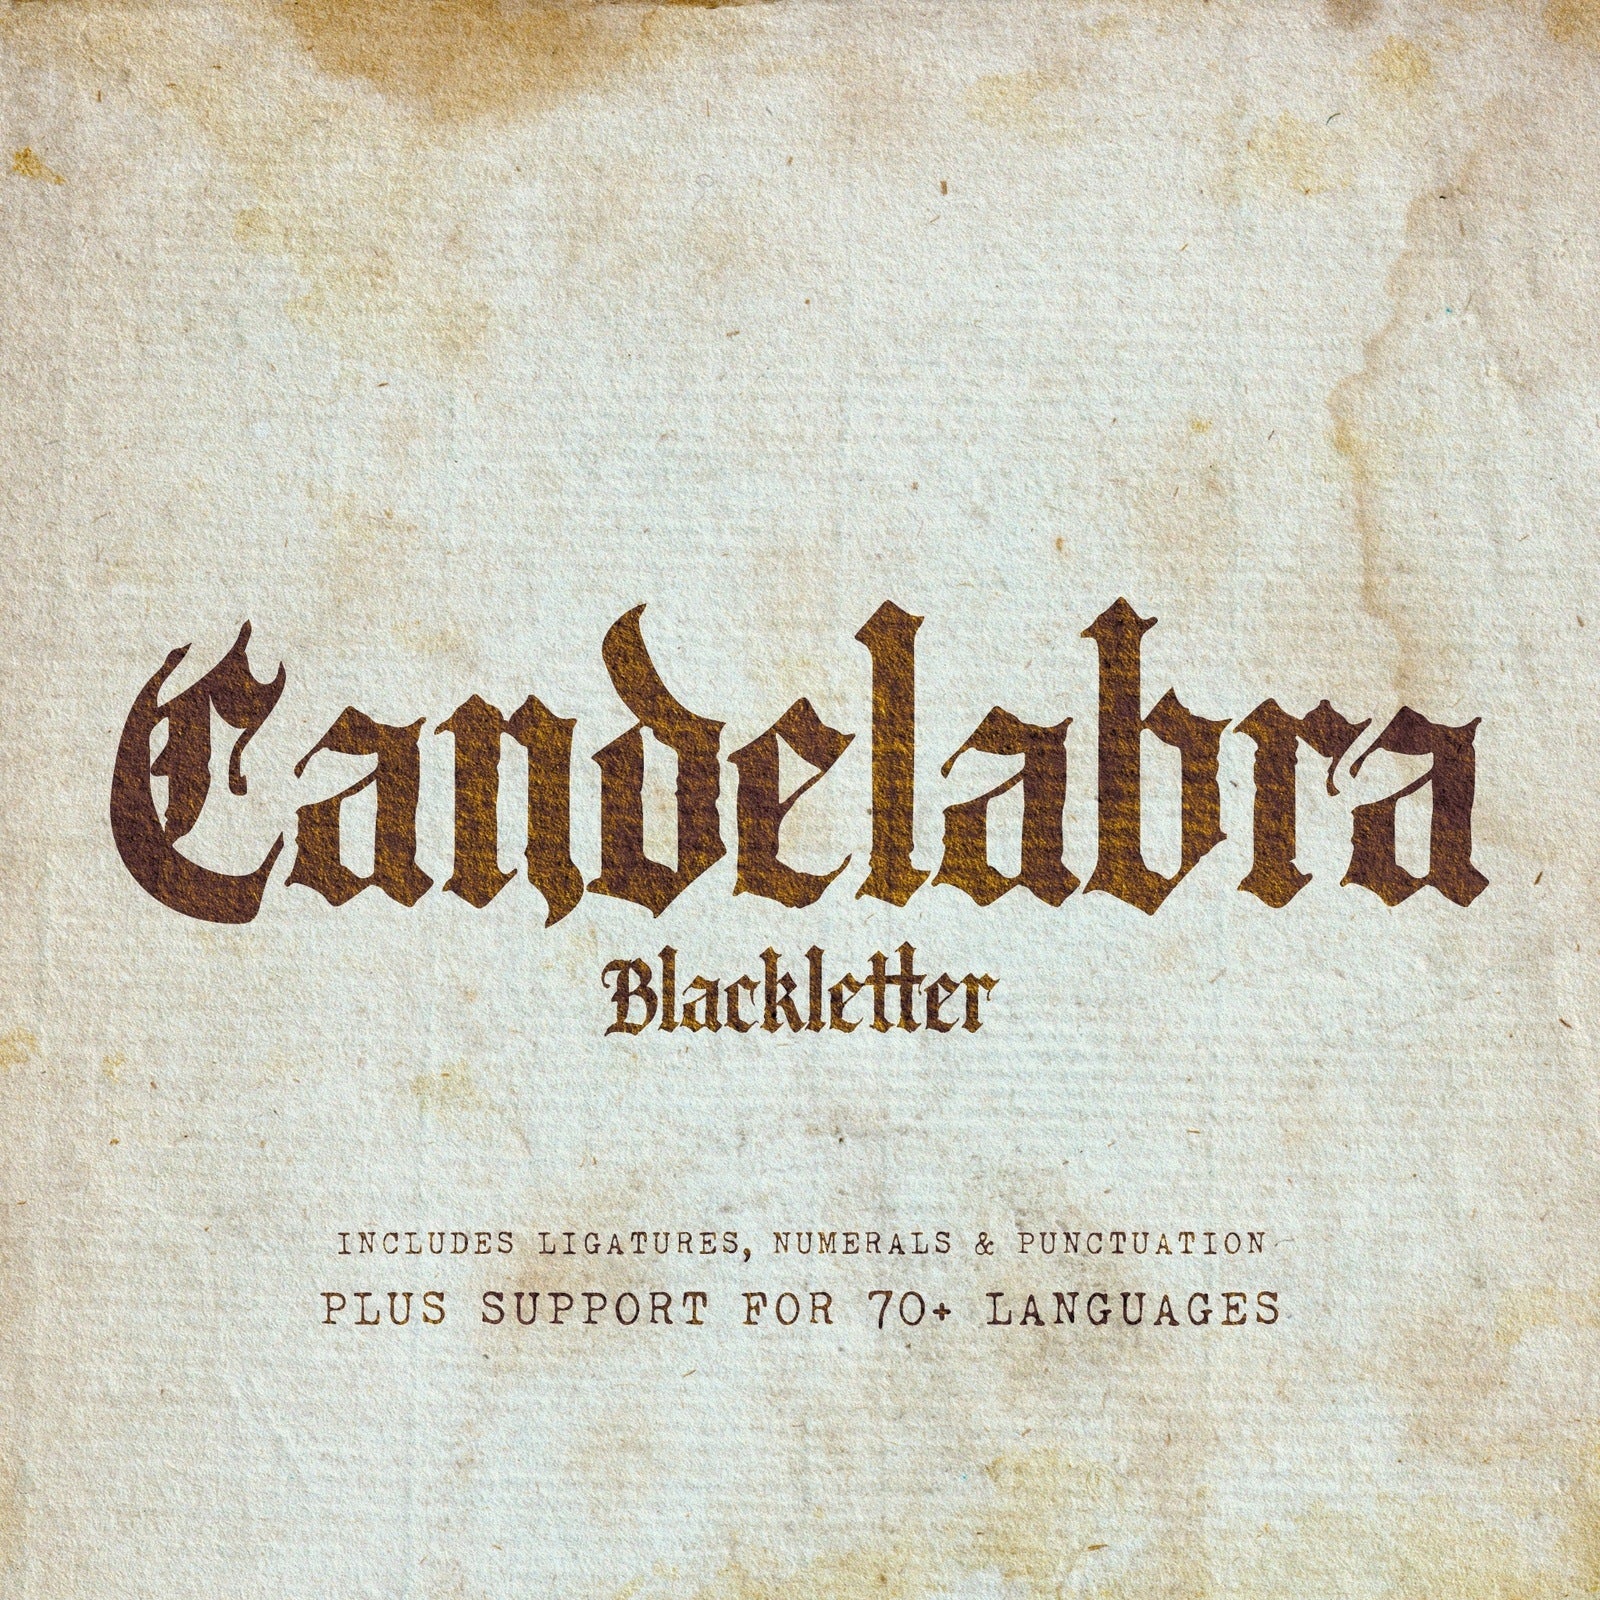 Candelabra main promotional image with a paper background and font name in dark brown